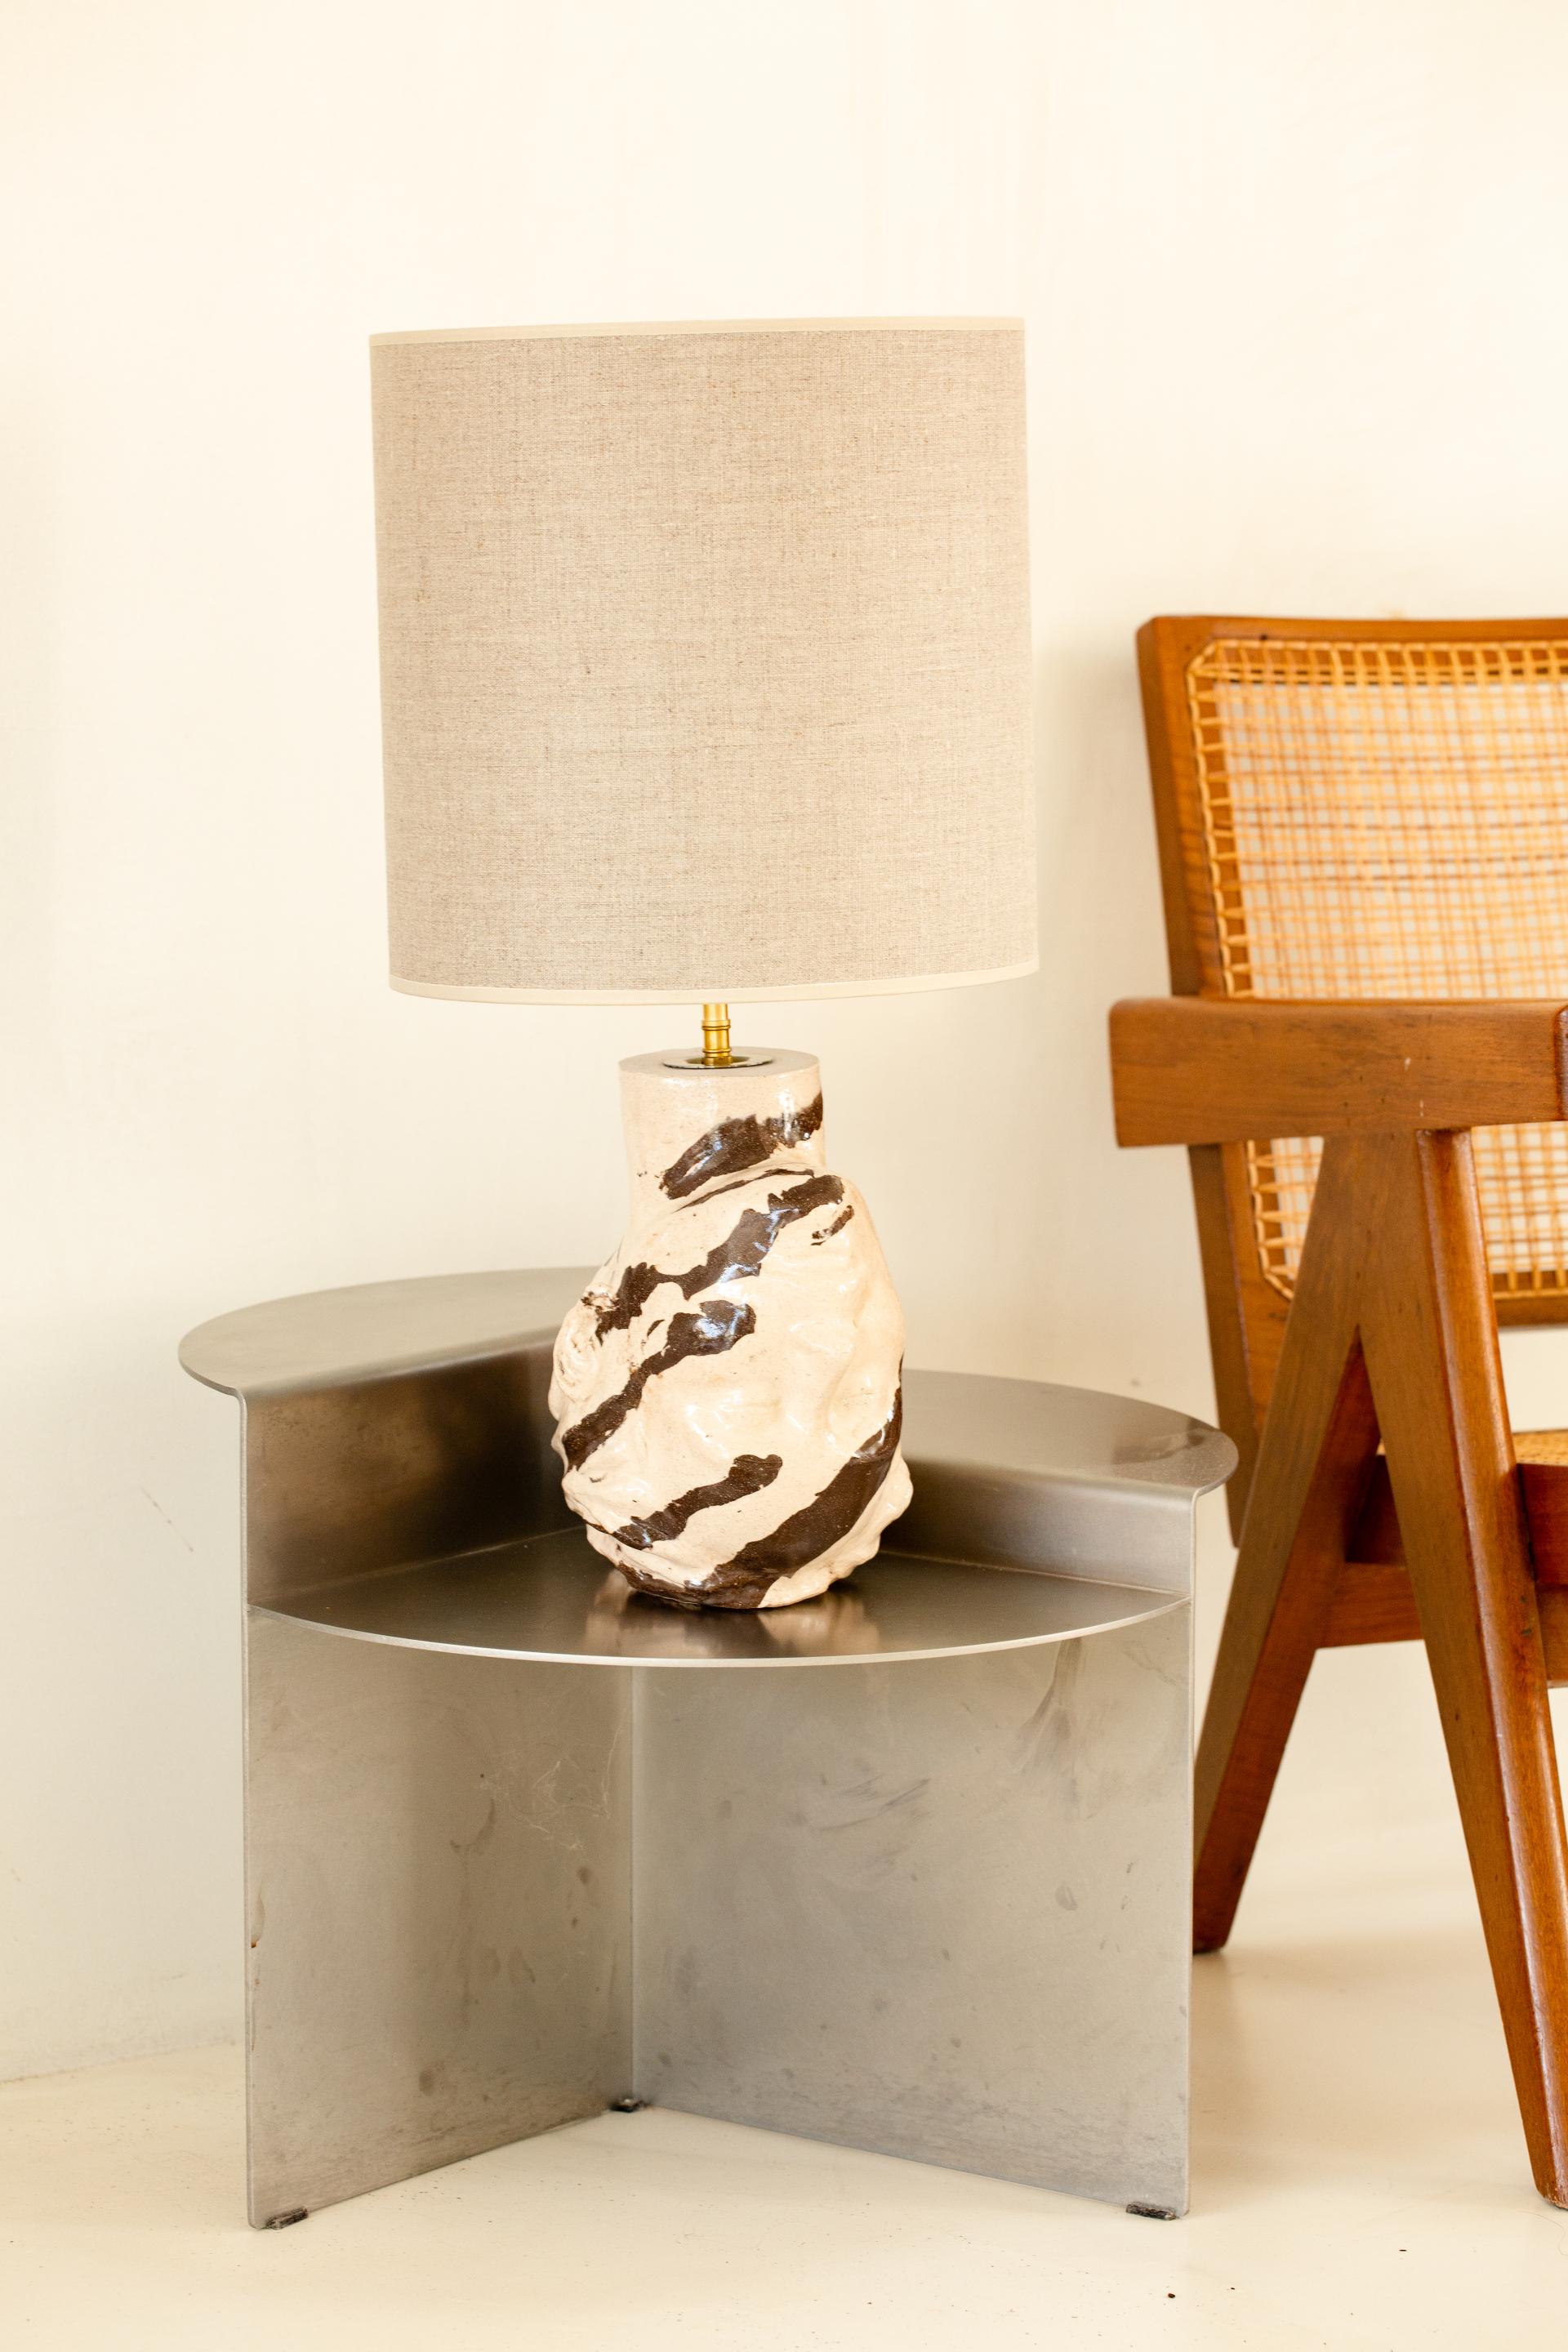 Upside Down Head Table Lamp by Di Fretto
Dimensions: W 23 x D 16 x H 25 cm (measure without lampshade)
Materials: Brown and White Glazed Faience

Lampshade included / Dimension: ⌀ 30 x H 30 cm


Aurélie Fretti, exploration and sculpture

DiFretto